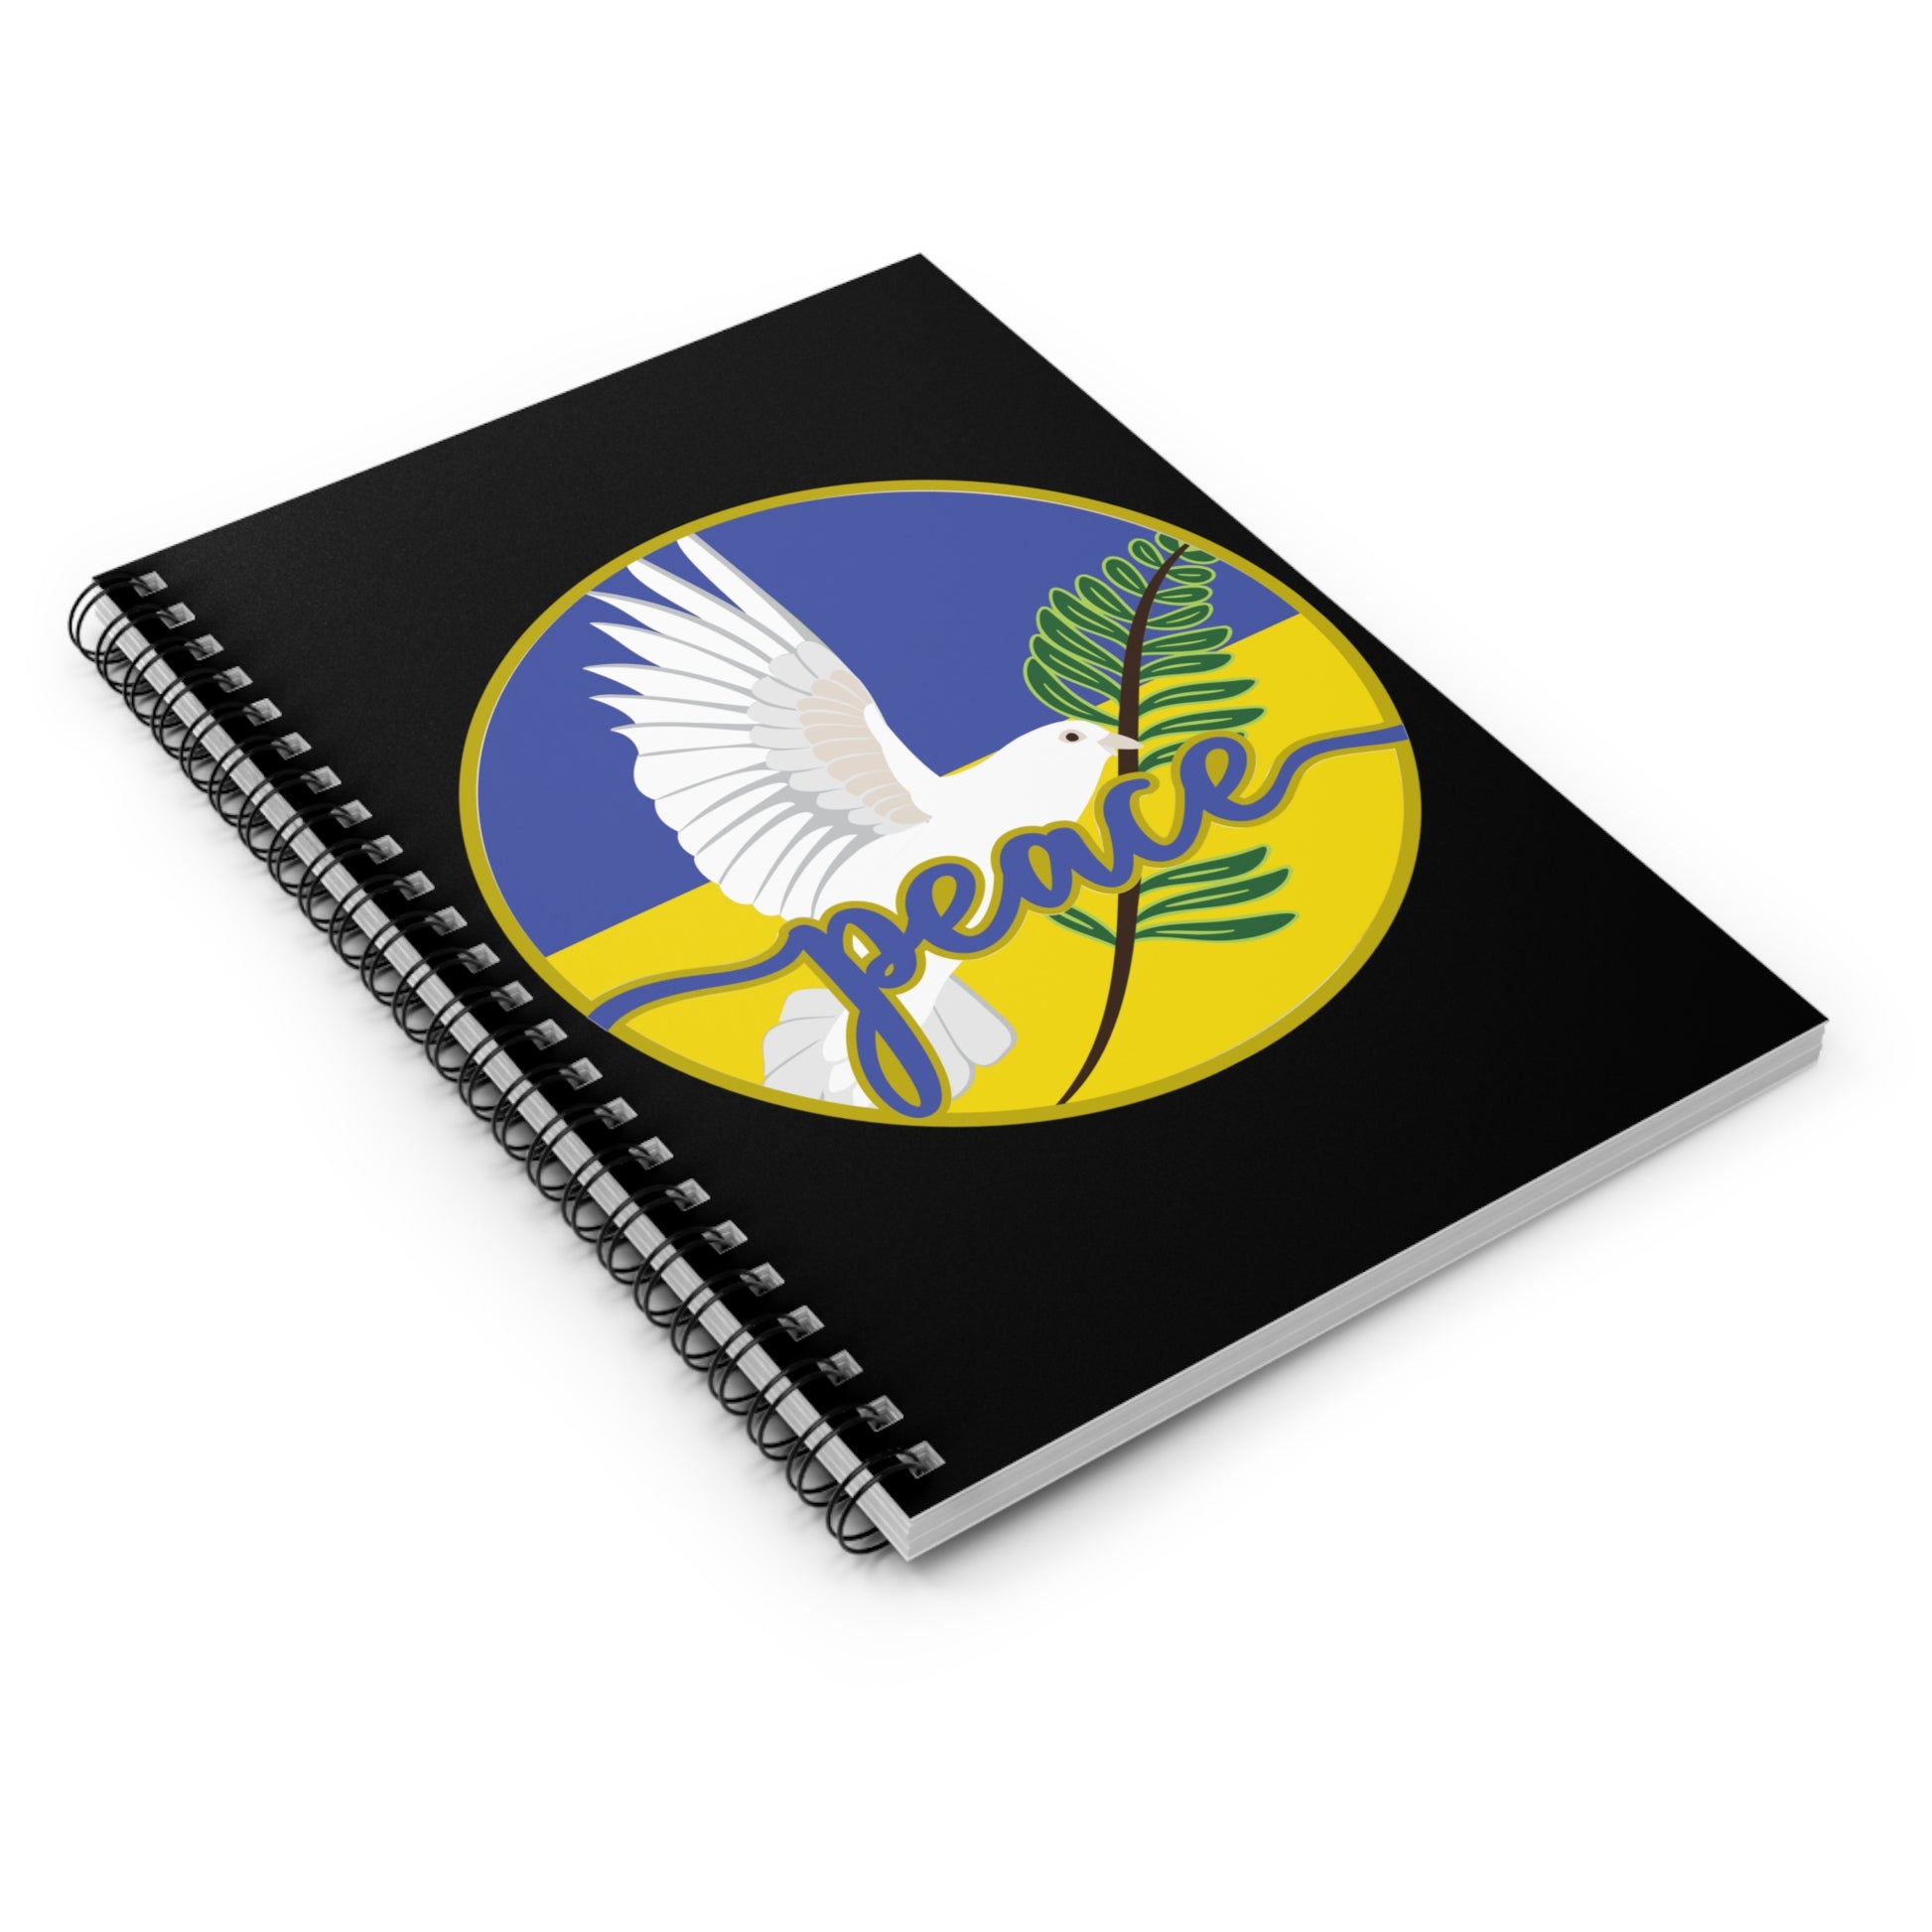 Peace Dove: Spiral Notebook - Log Books - Journals - Diaries - and More Custom Printed by TheGlassyLass